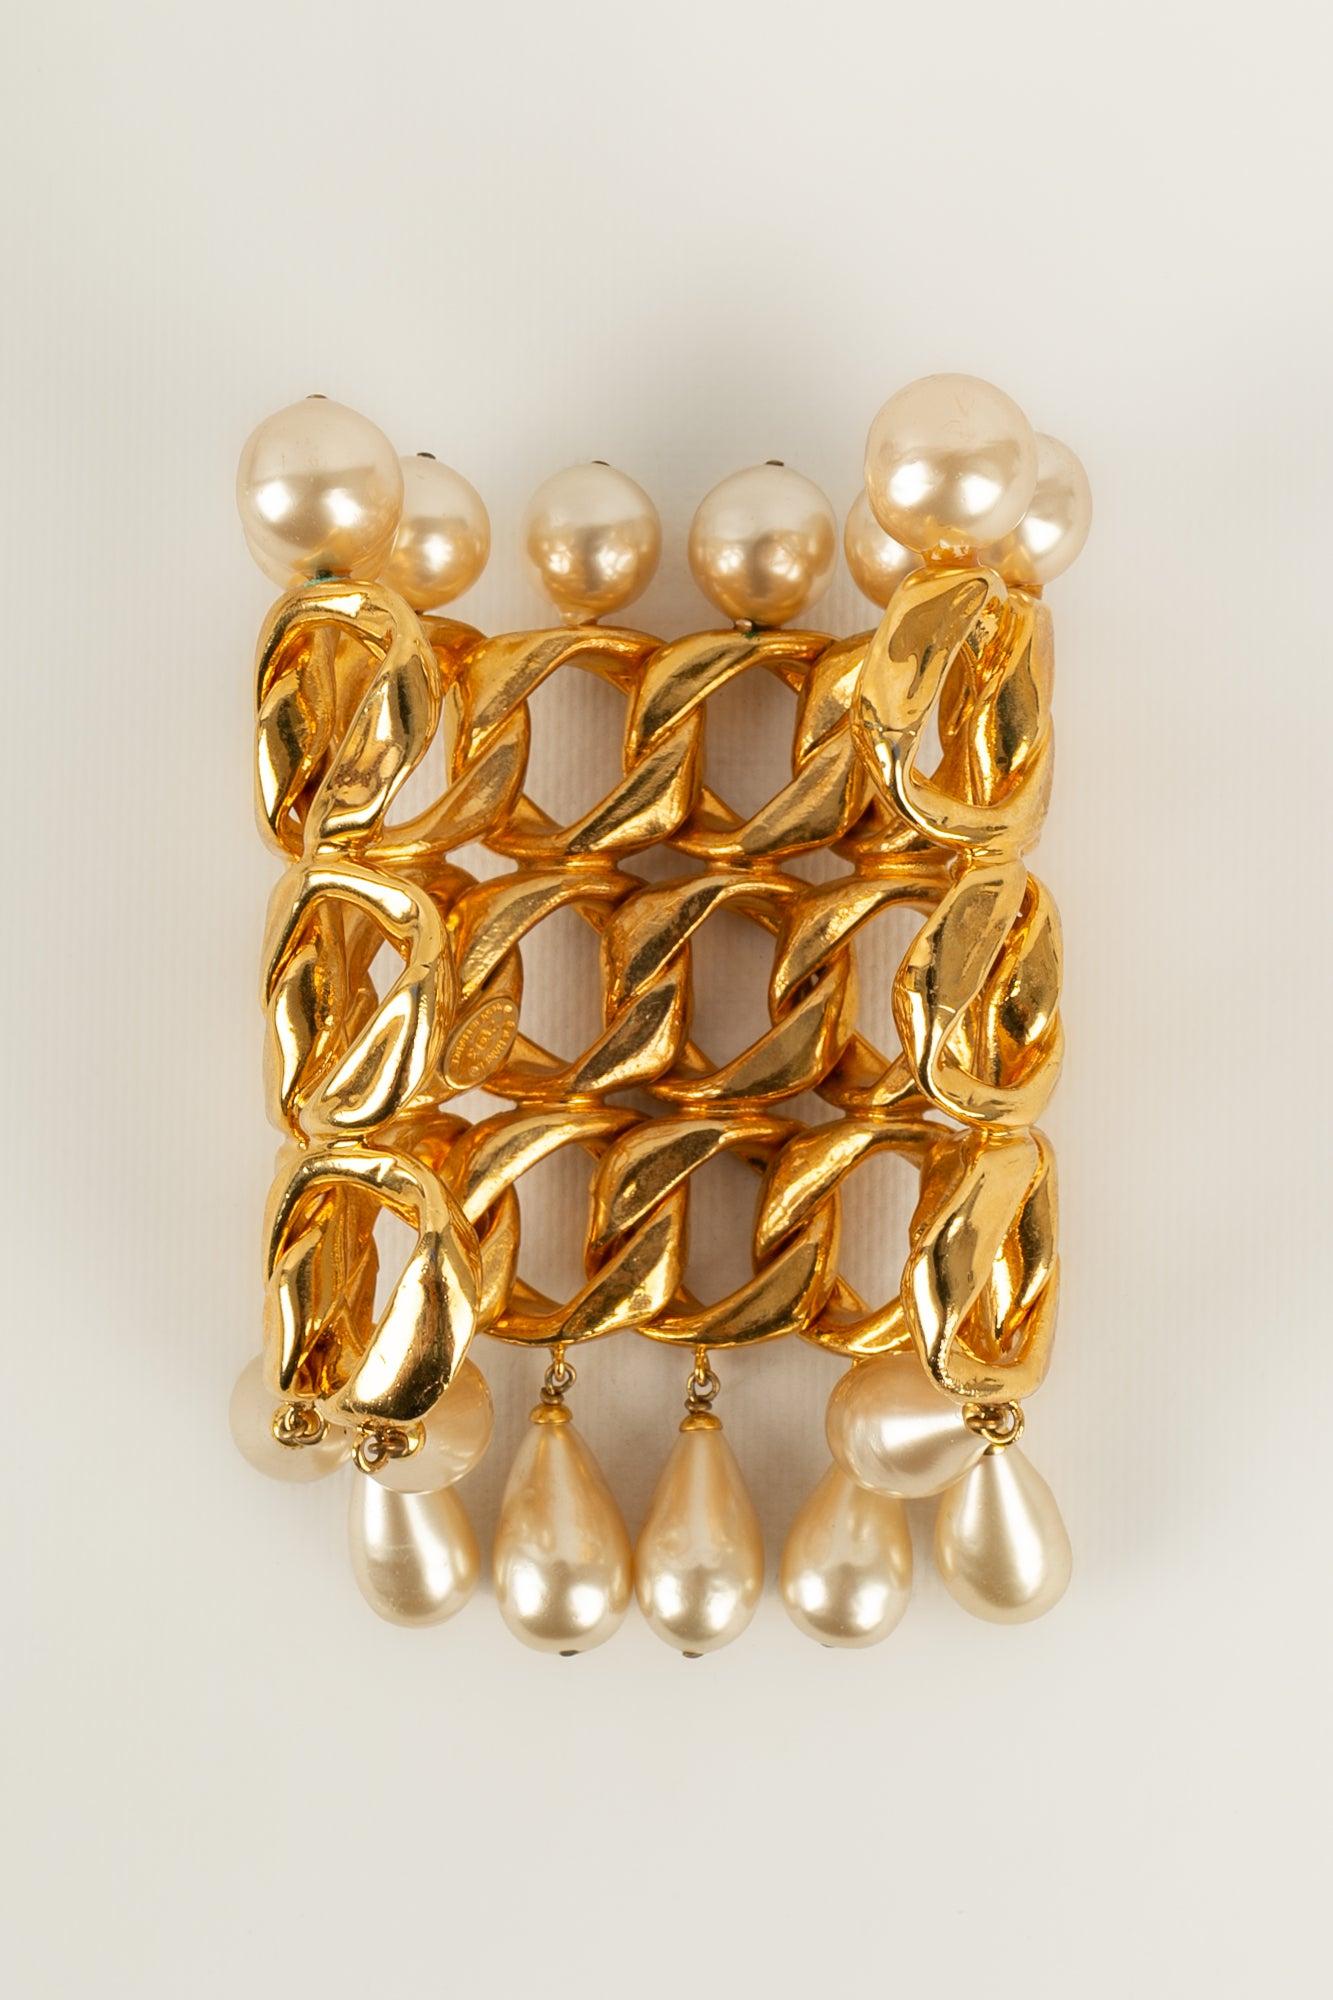 Chanel - (Made in France) Cuff in golden metal, costume pearls, and pearly drops. 2cc3 Collection. To be noted, verdigris and few marks on the pearls.

Additional information:
Condition: Good condition
Dimensions: Circumference: 15 cm - Opening: 4